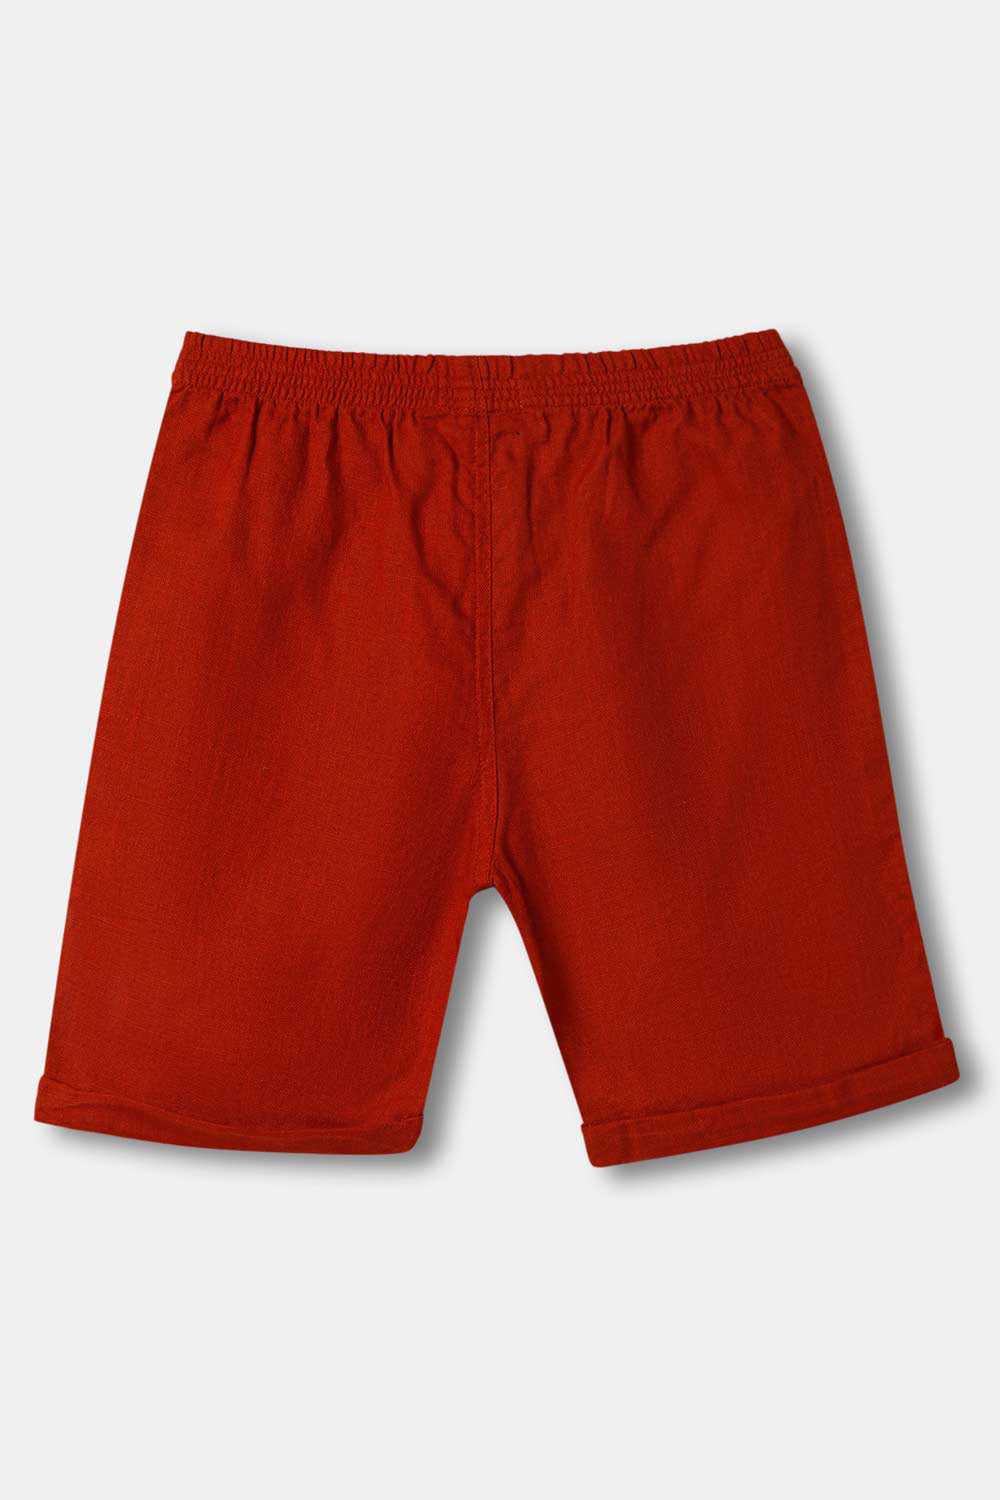 The Young Future  Shorts for Boys  - Brown  - BS05